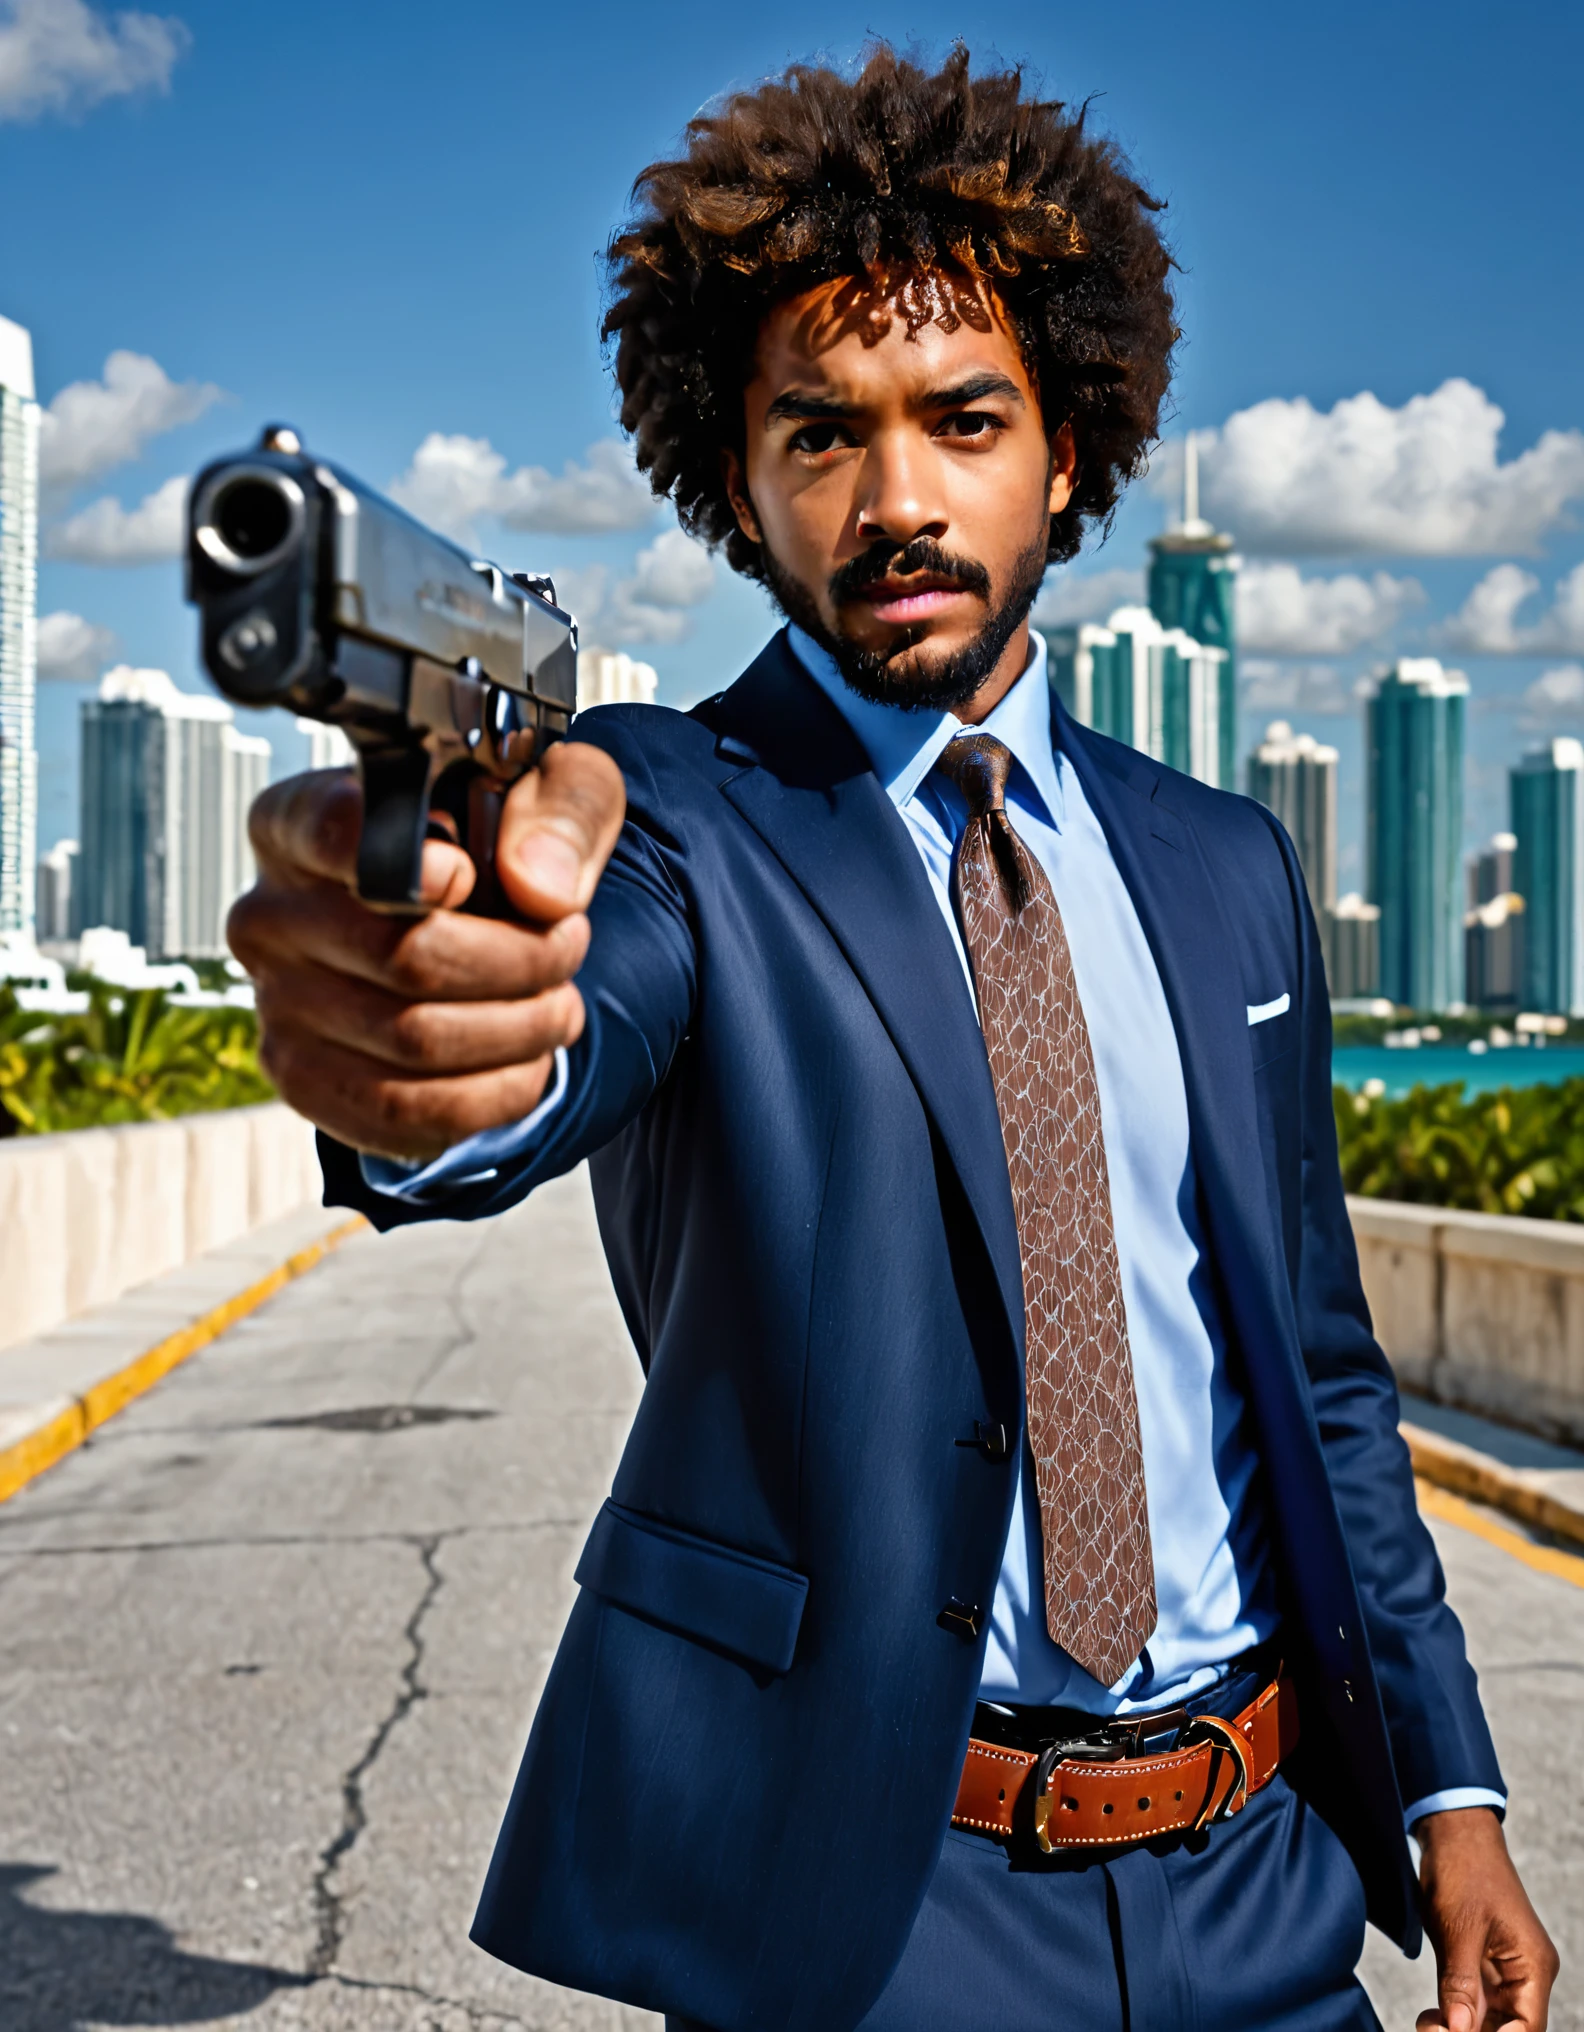 ((masterpiece)), ((best quality)), ((high res)), 1boy, 1man, solo, solo focus, age 30, african-american, brown skin, beard, belt, brown_eyes, brown_hair, large afro, facial_hair, finger_on_trigger, gun, handgun, holding, holding_gun, holding_weapon, jacket, male_focus, mustache, necktie, pistol, pointing pistol, Smith and Wesson 659, light blue shirt, solo, stubble, trigger_discipline, watch, weapon, wristwatch, full body with costume, miami backdrop, dark blue suit and tie